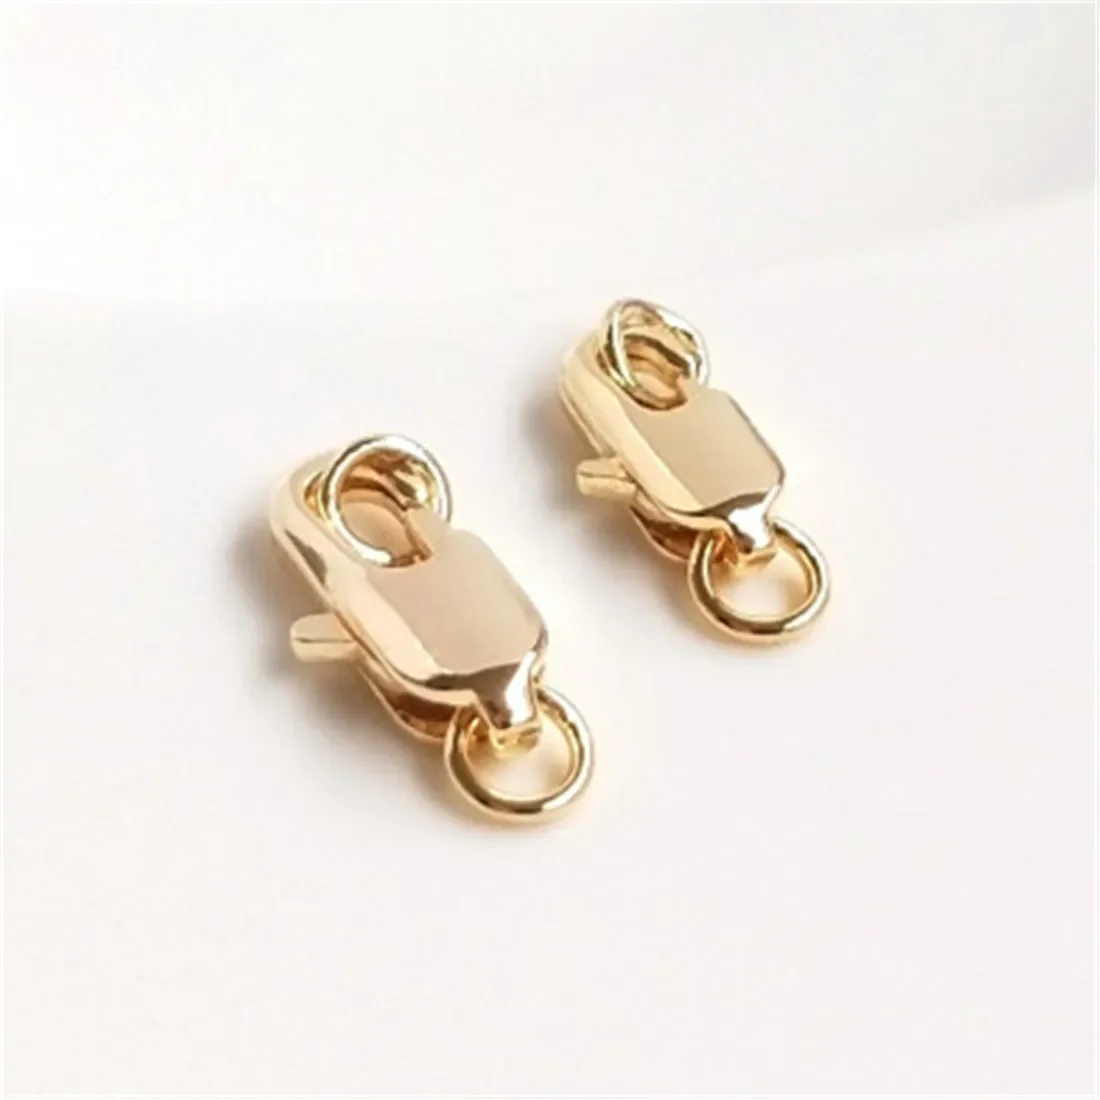 

Korean Fishtail Buckle Spring Buckle 14K Gold-plated Accessory DIY Bracelet Necklace Connecting Lobster Buckle Material B902